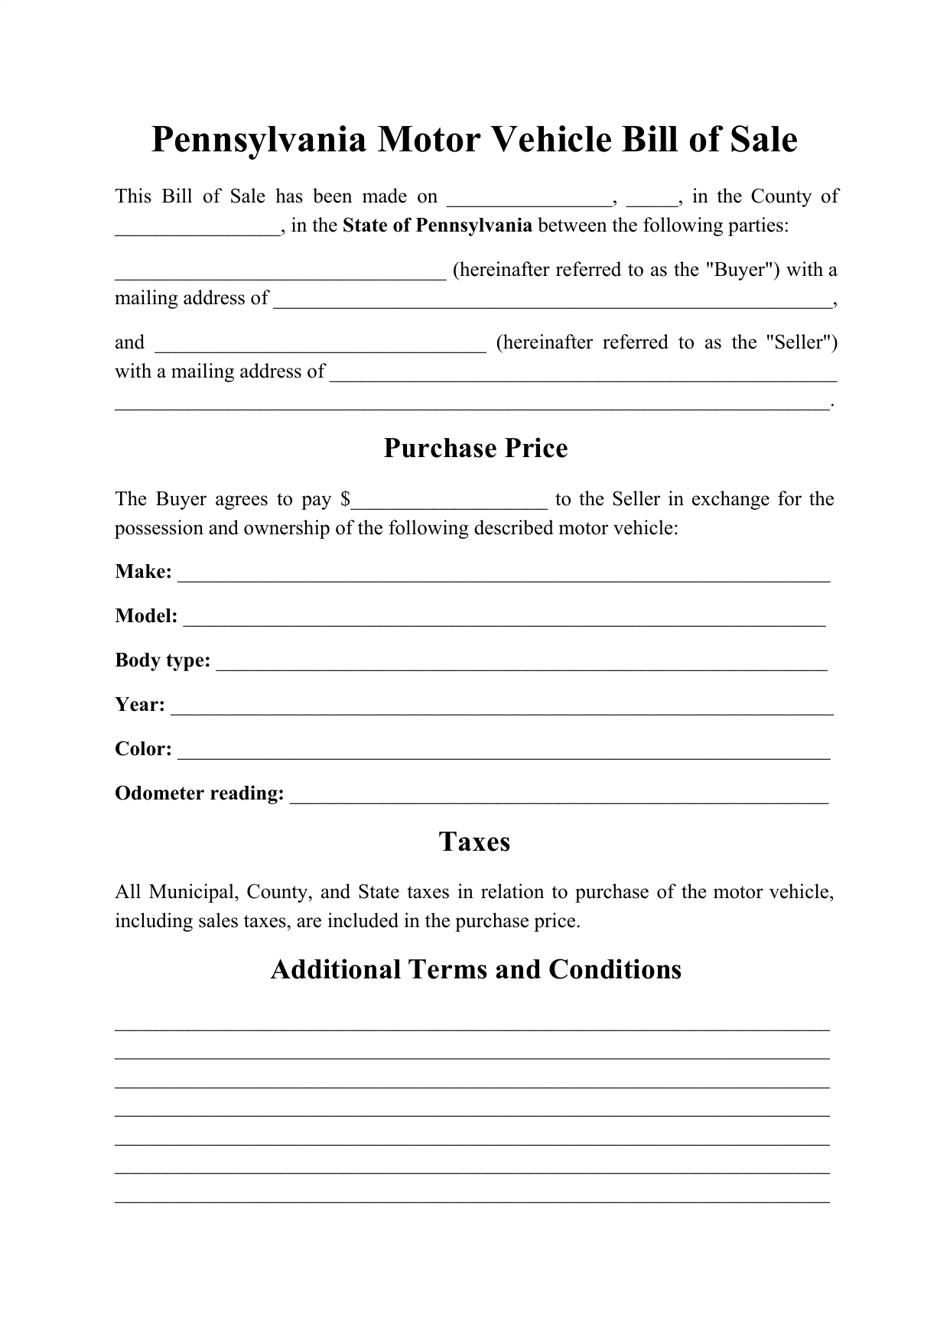 Motor Vehicle Bill of Sale Form - Pennsylvania, Page 1